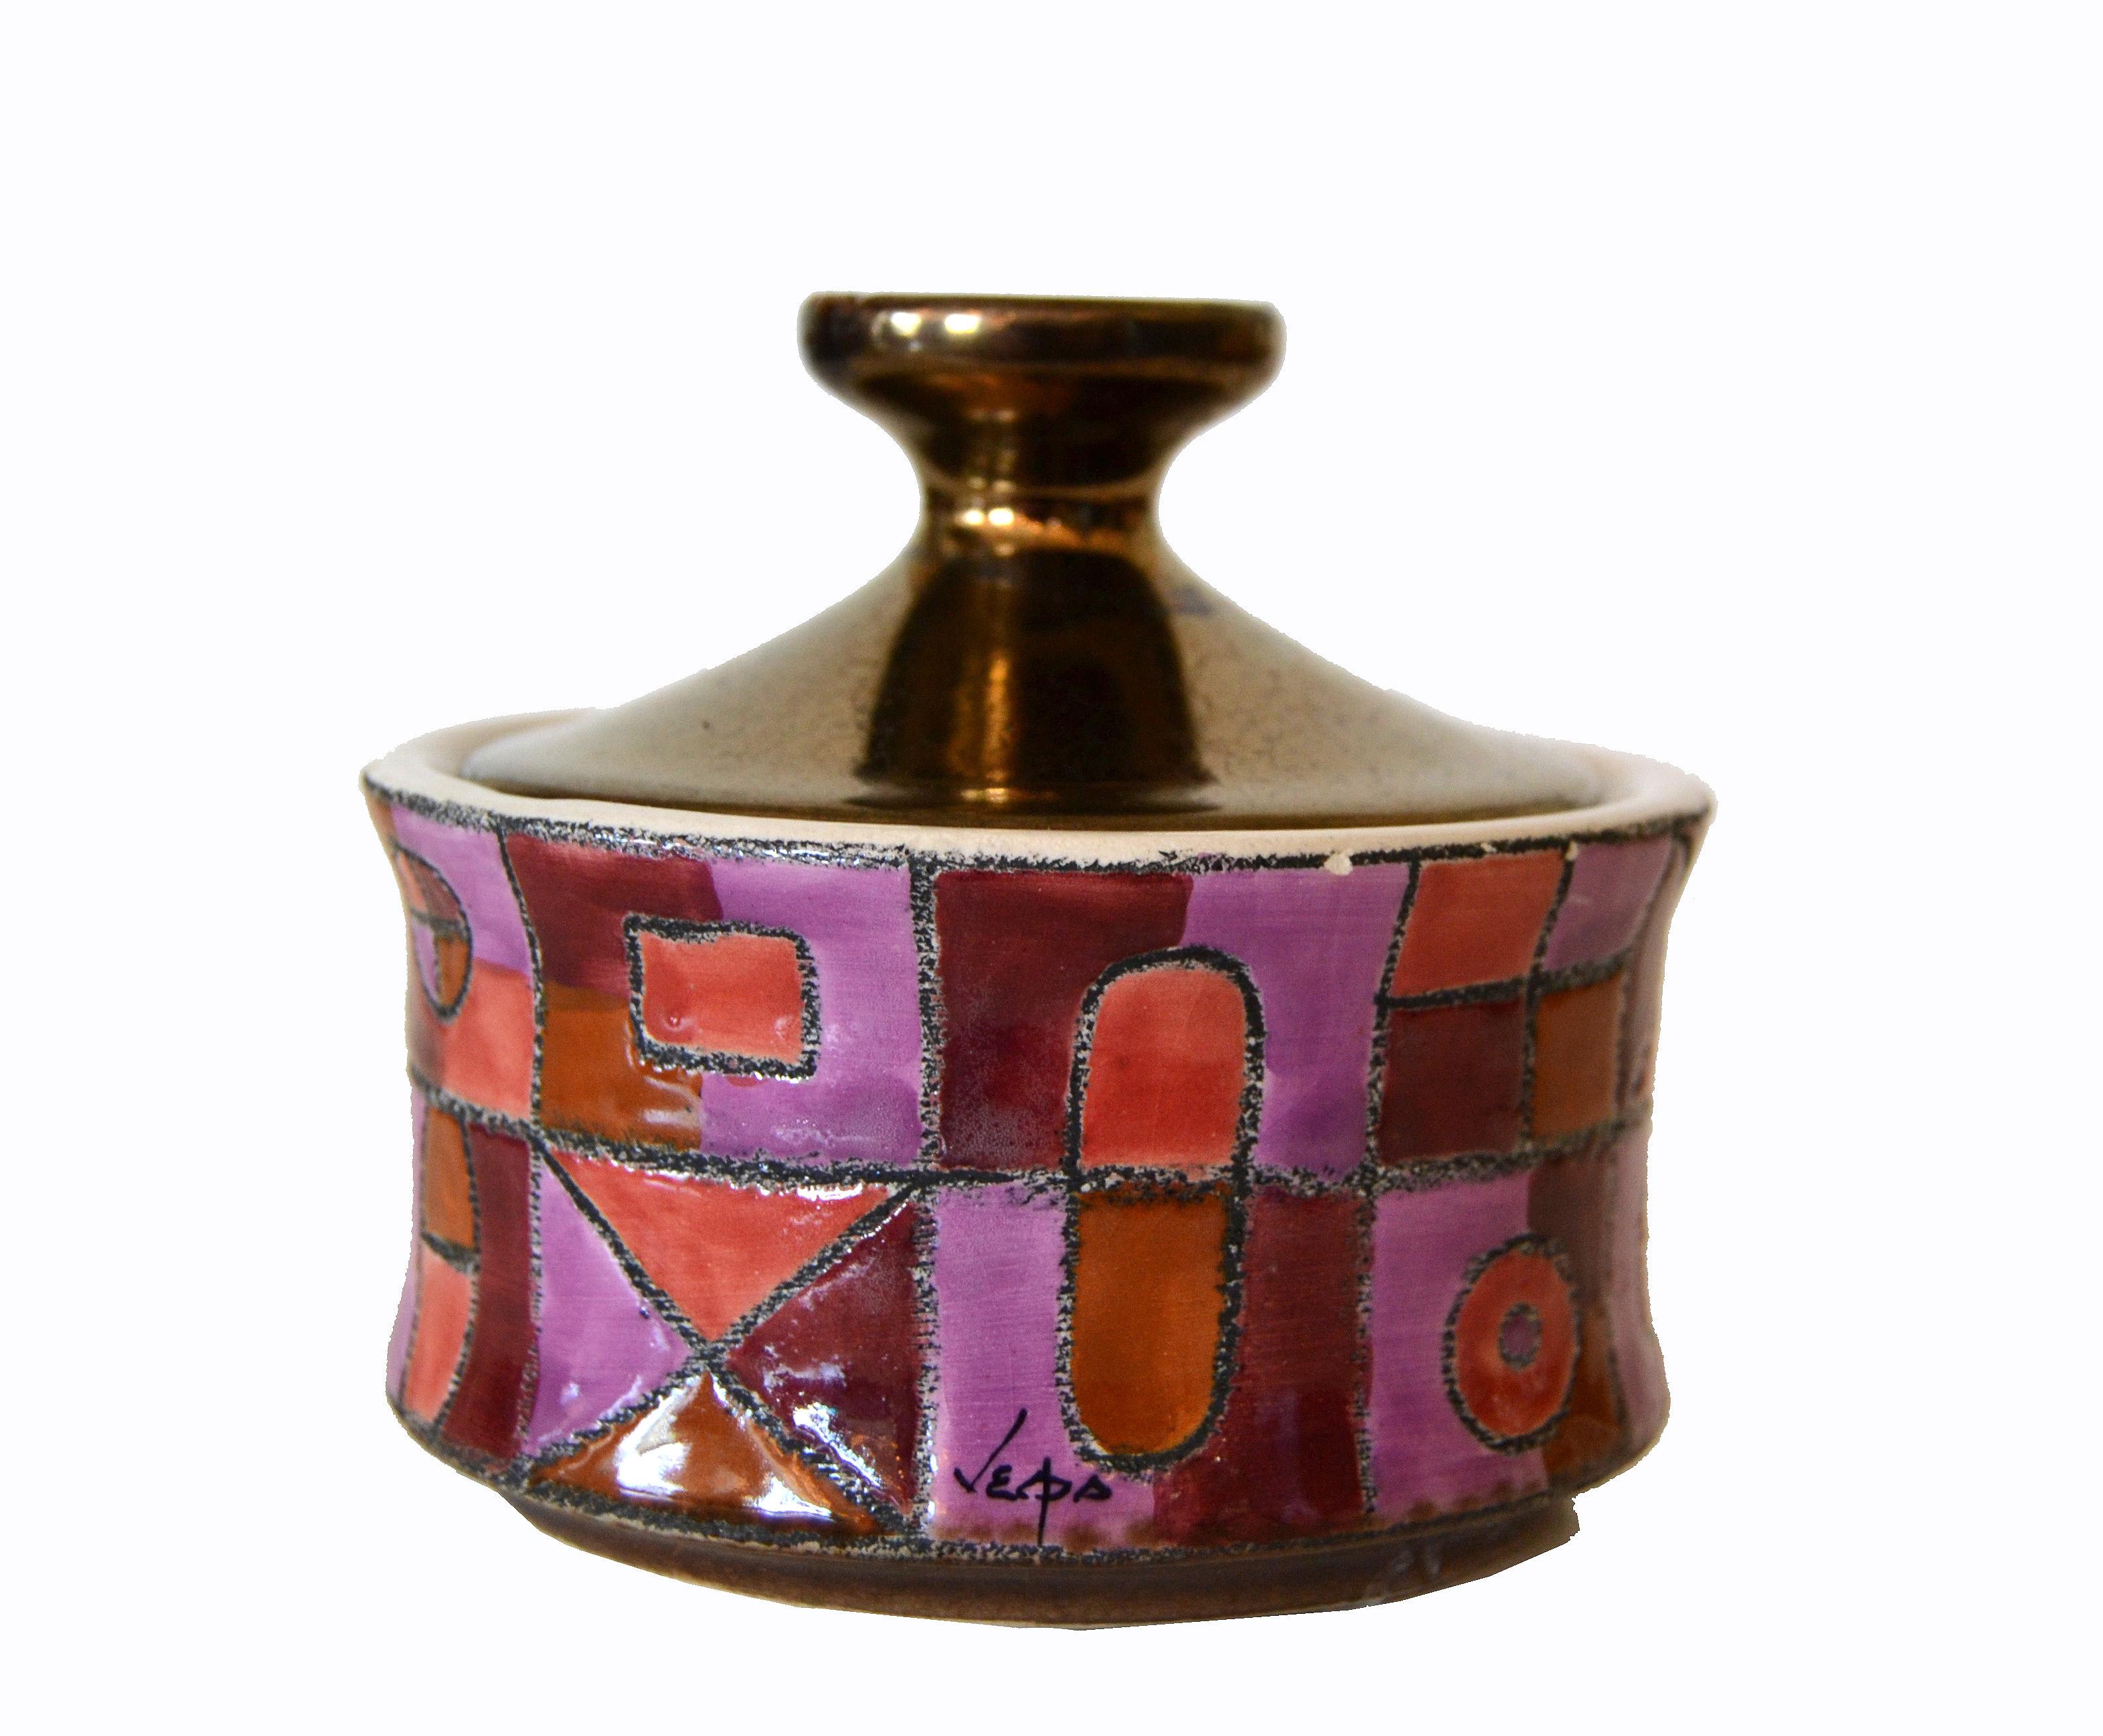 Marked Ceramic Sugar Bowl with Lid in Purple, Bronze & Shades of Maroon Color 4